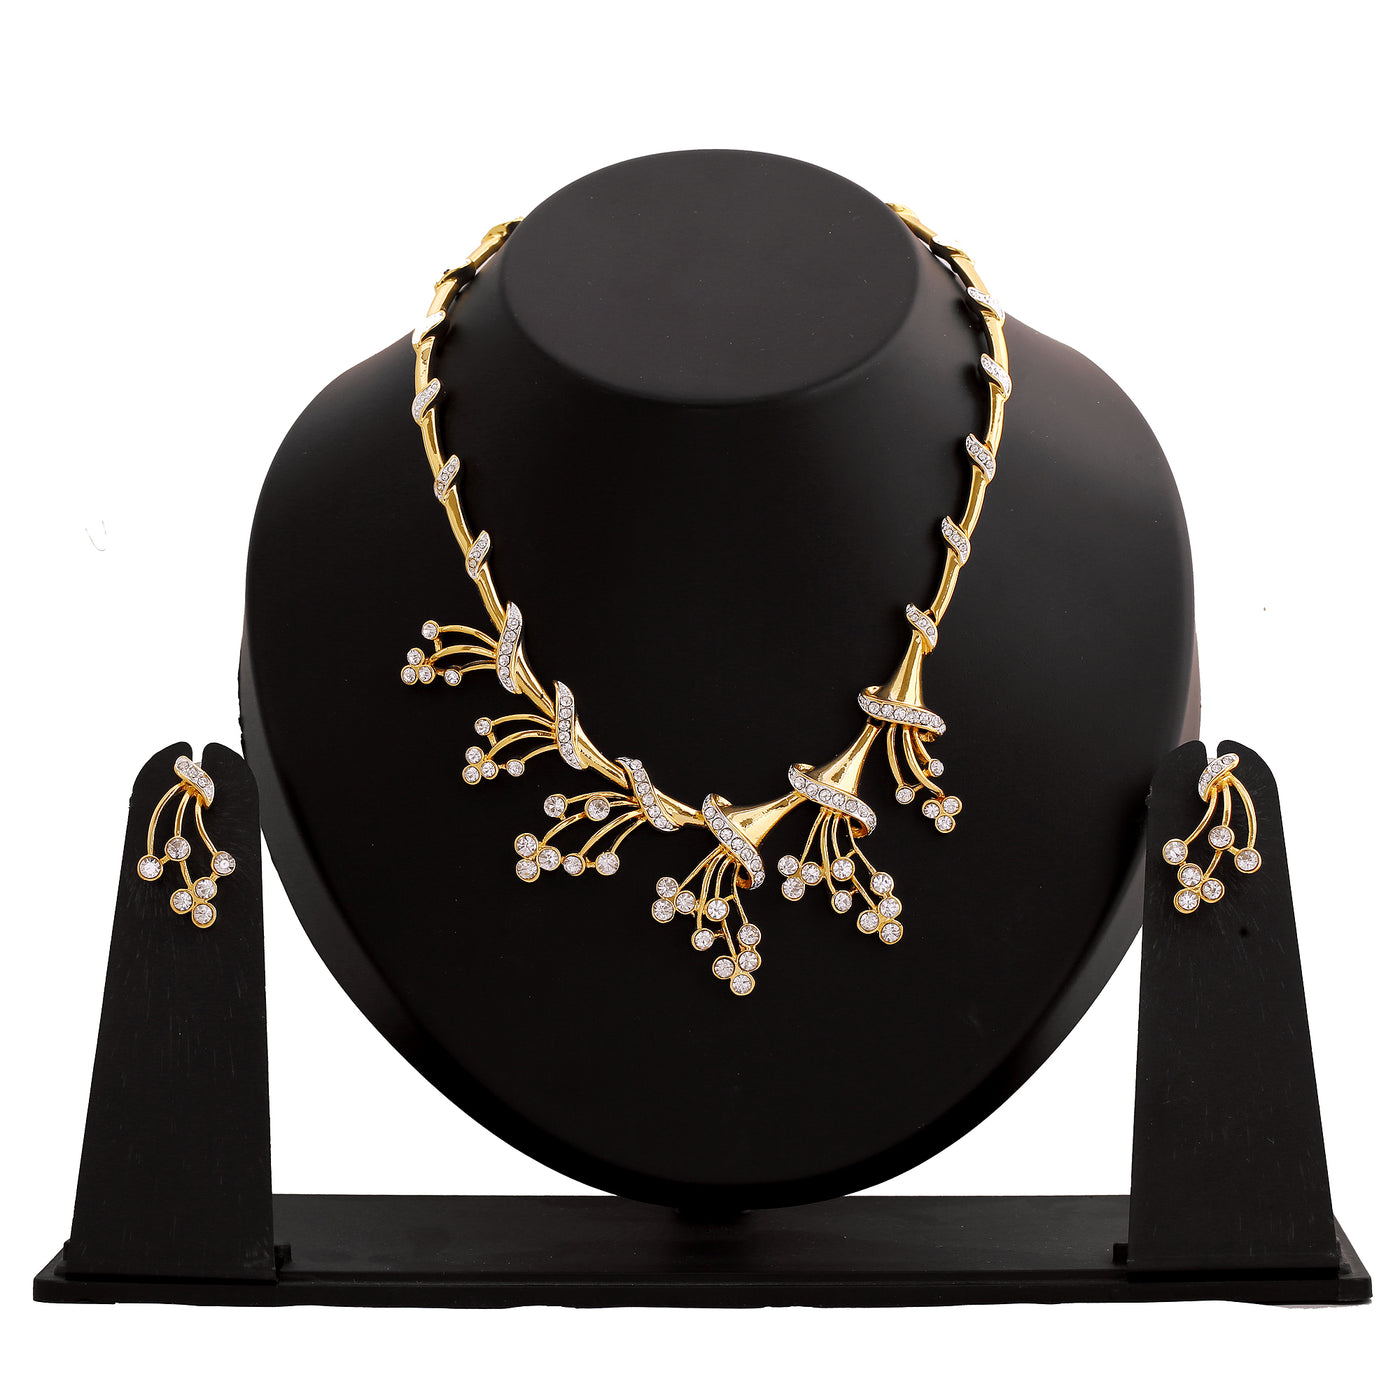 Stylish Gold and Silver plated Eternal Garden Necklace